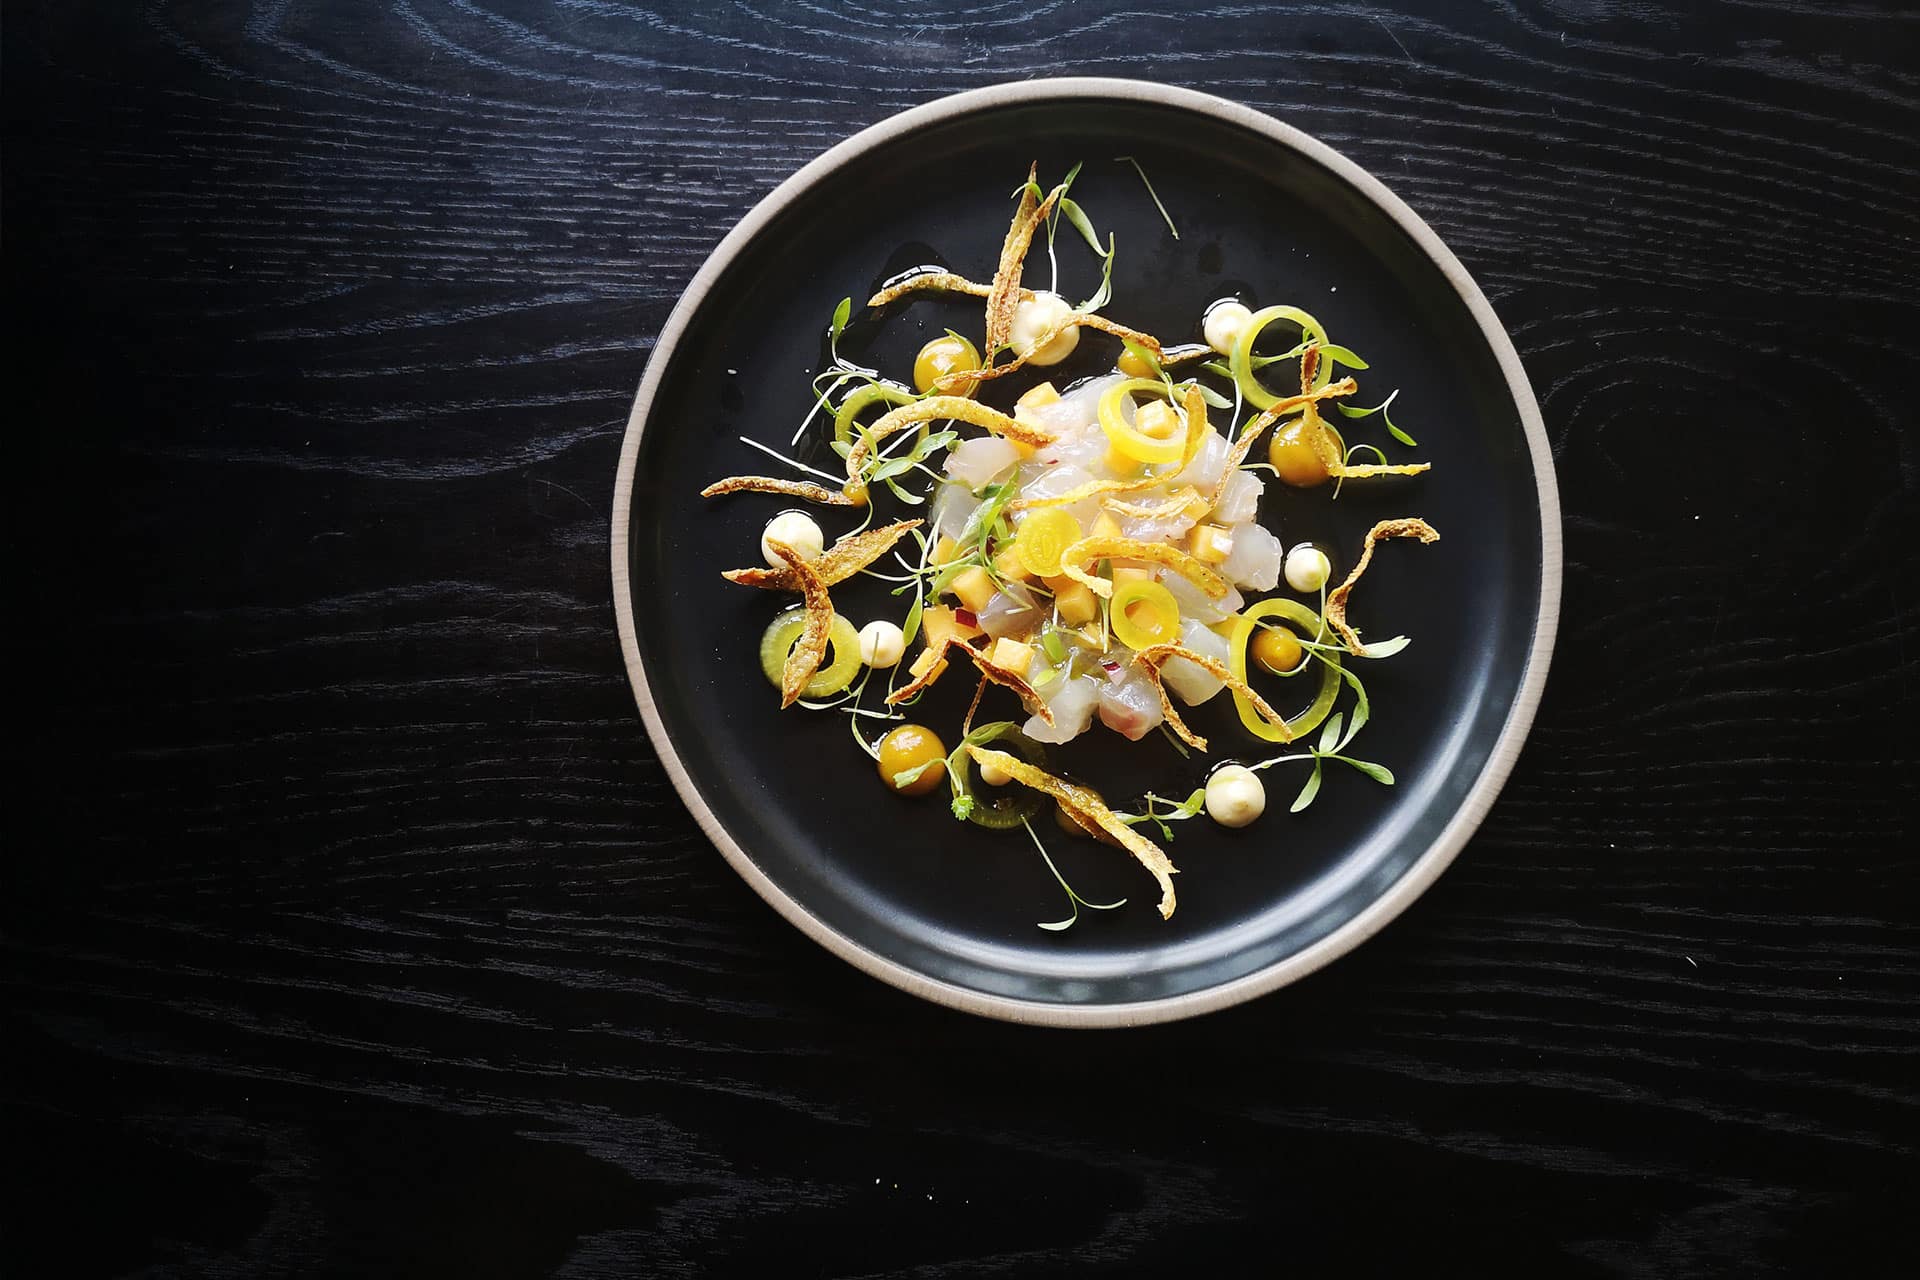 A plated dish at Belly of the Beast – one of the top 10 fine dining restaurants in Cape Town.